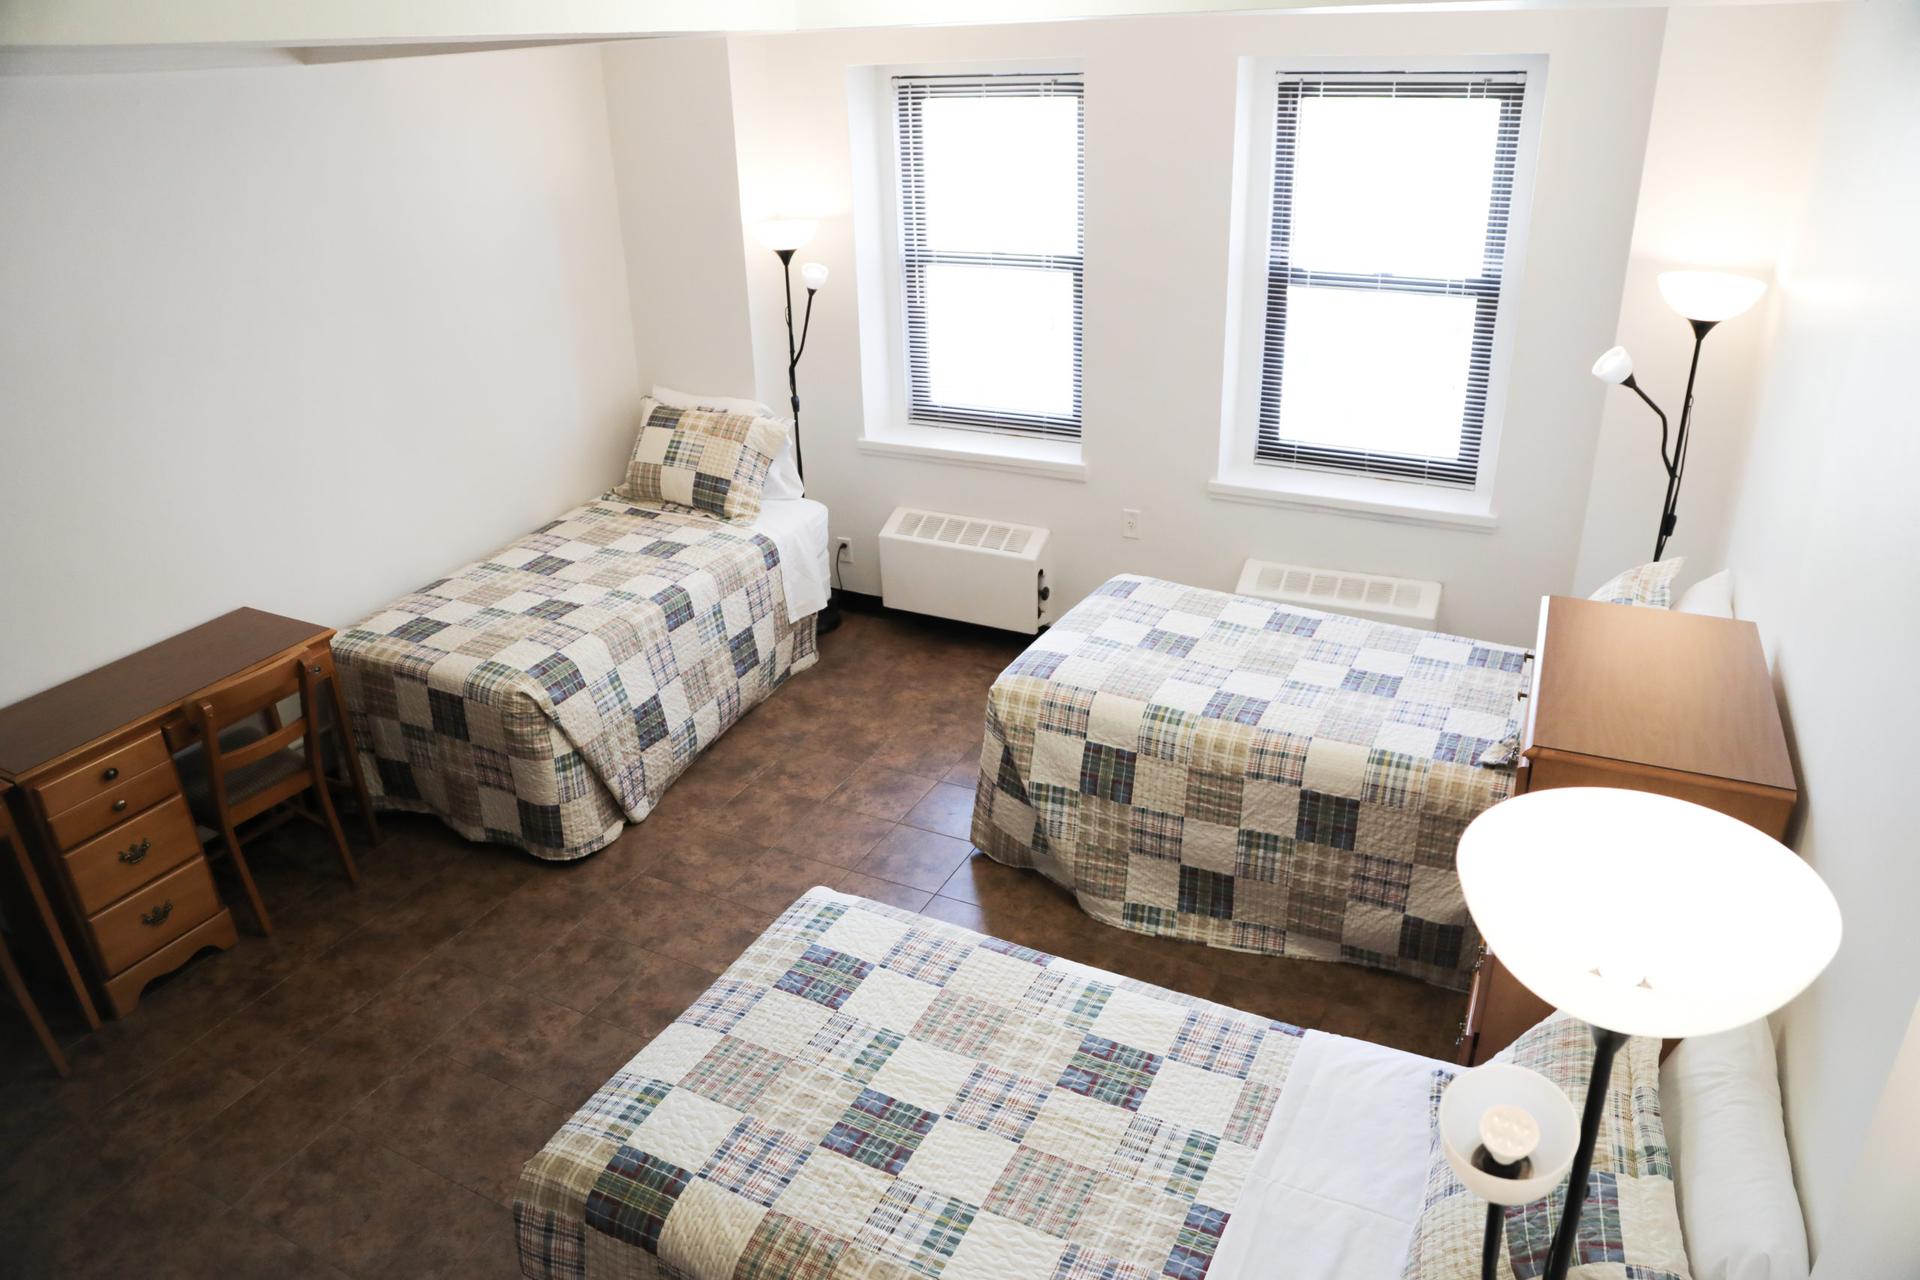 Typical 4b2b homes for students in Brooklyn